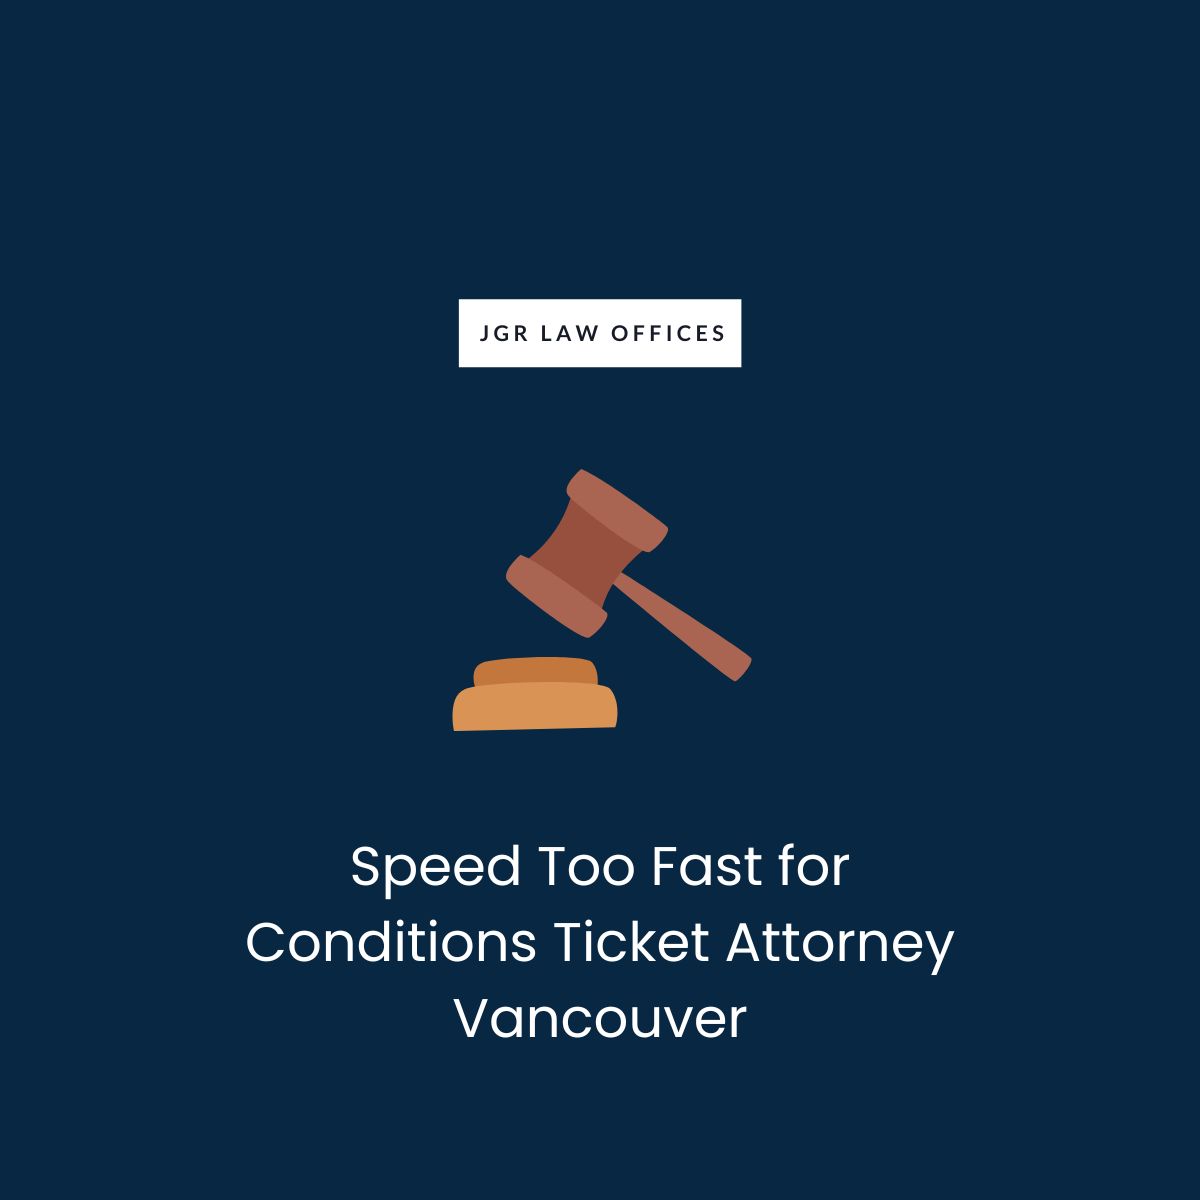 Speed Too Fast for Conditions Ticket Attorney Vancouver